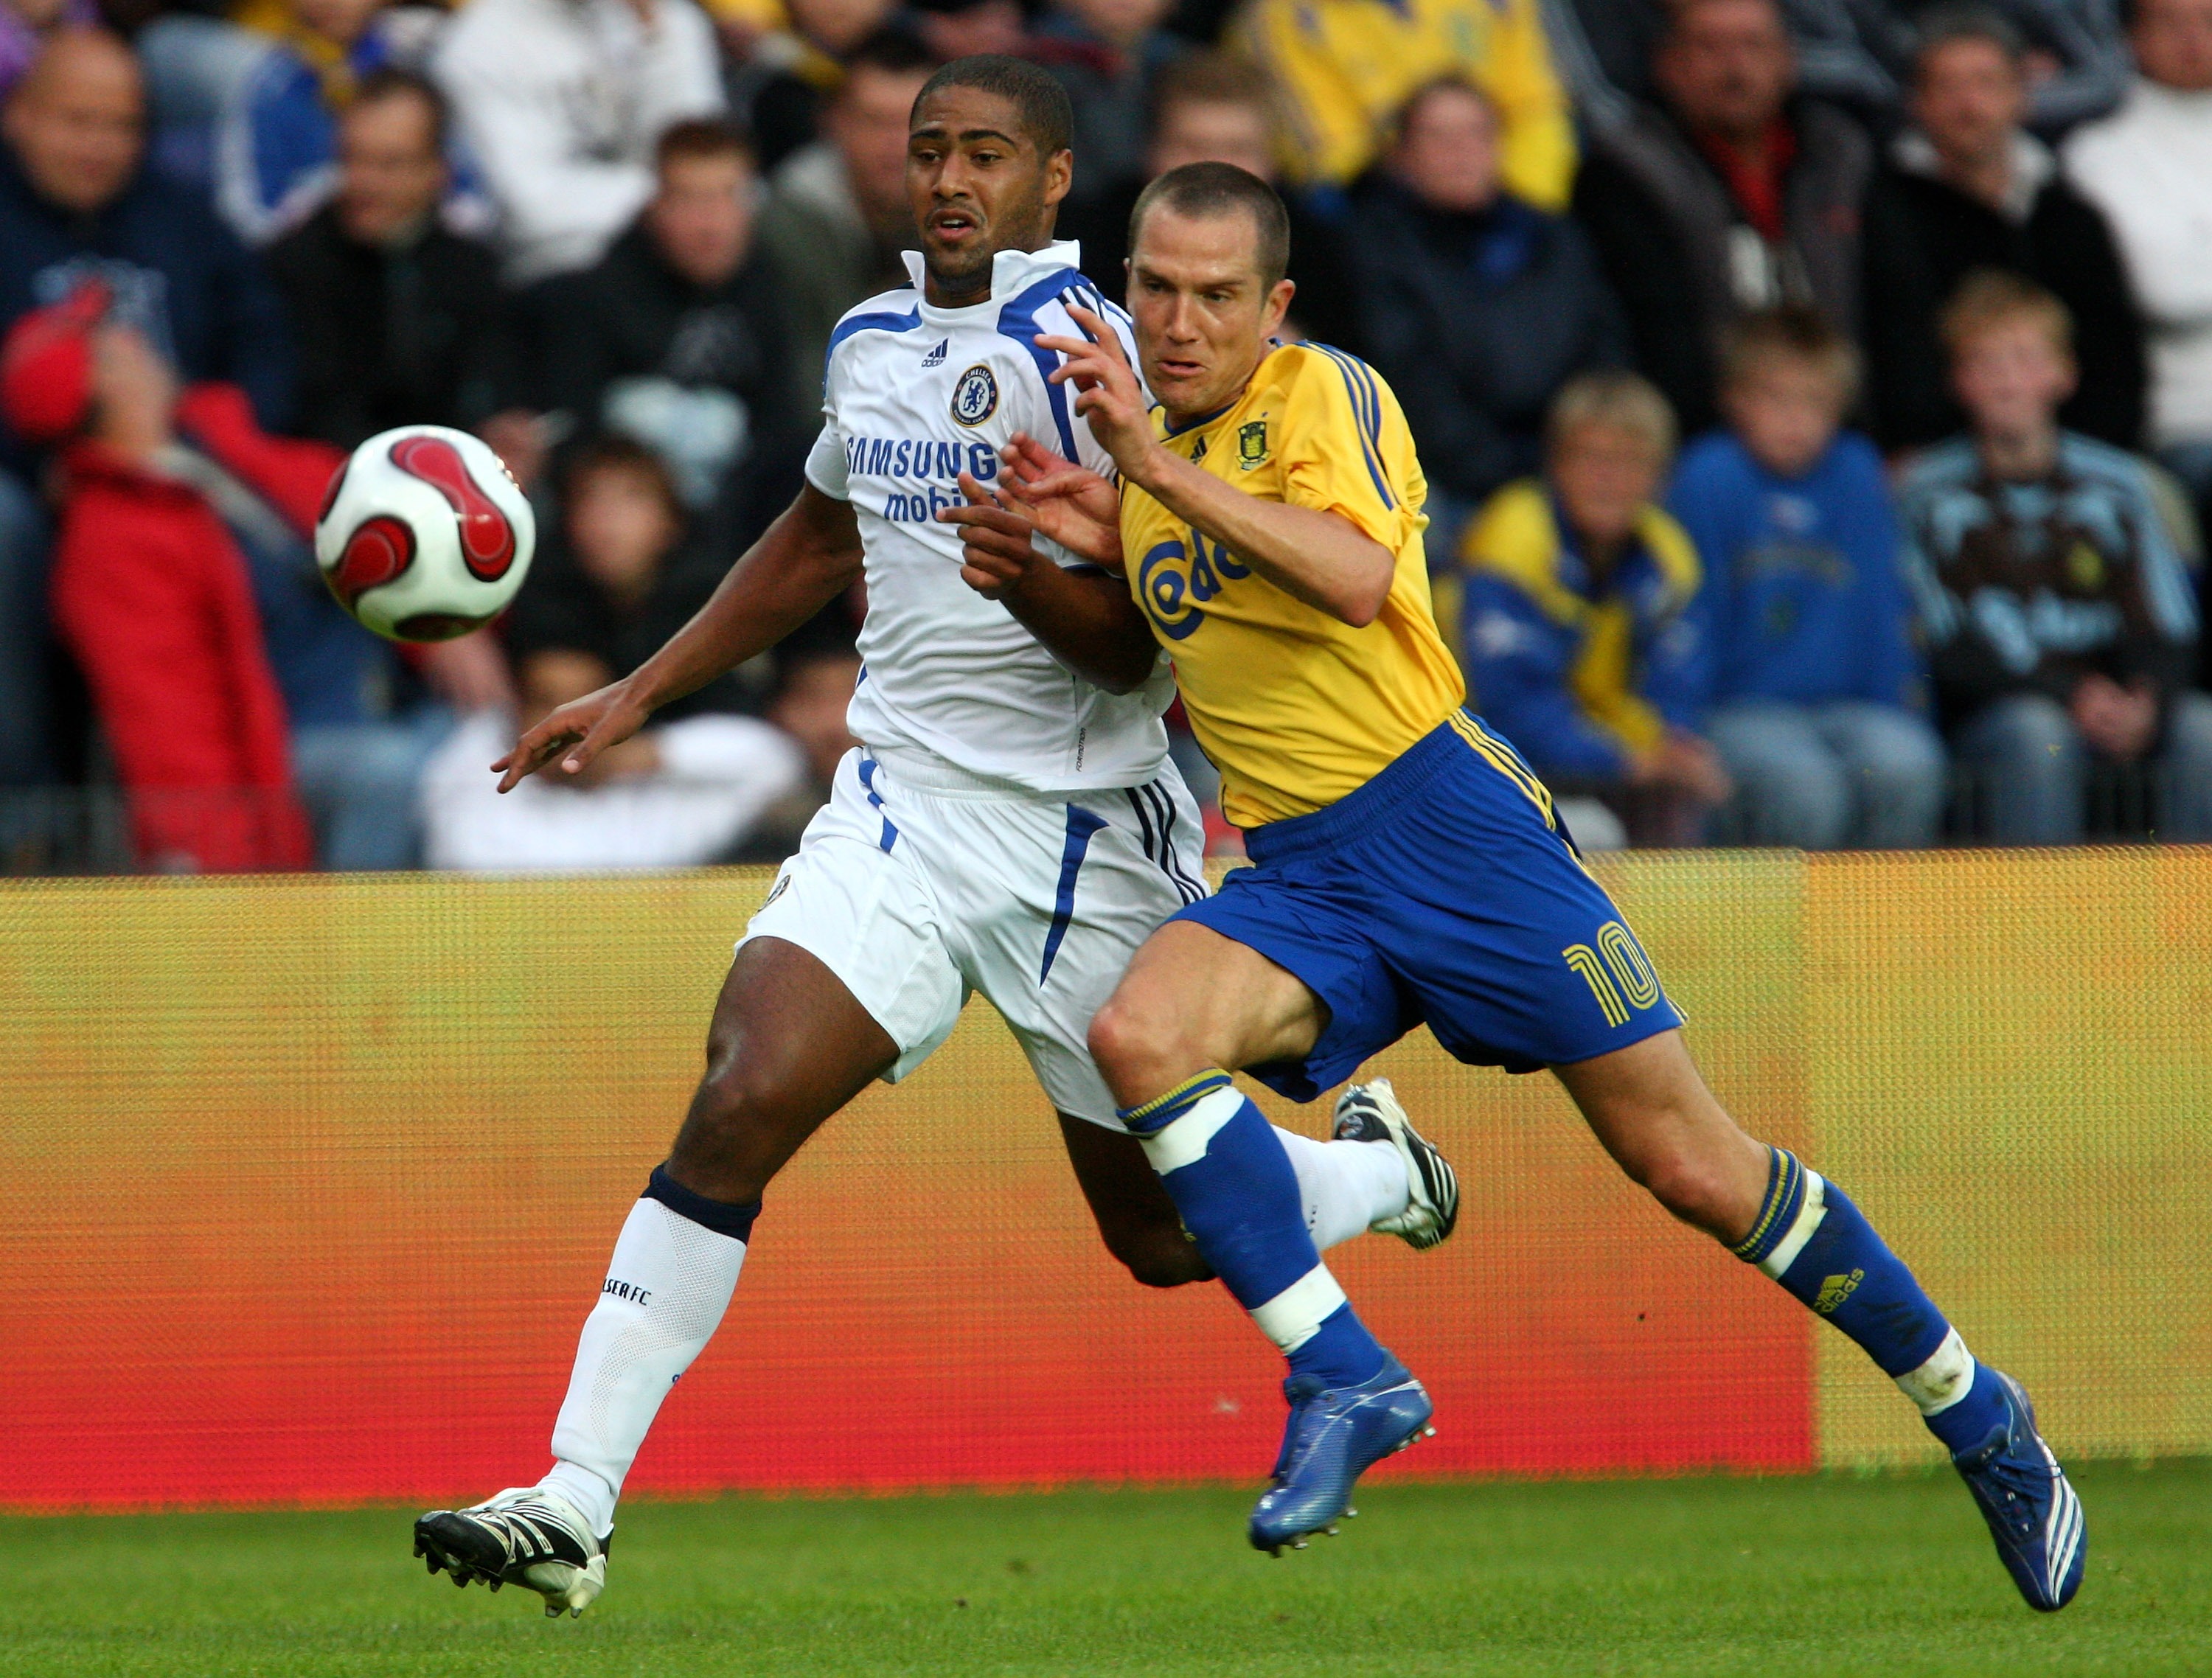 COPENHAGEN, DENMARK - JULY 31:  Glen Johnson of Chelsea battles with Martin Ericsson of Brondby during the pre-season friendly between Brondby and Chelsea at the Brondby Stadium on July 31, 2007 in Copenhagen, Denmark.  (Photo by Mike Hewitt/Getty Images)